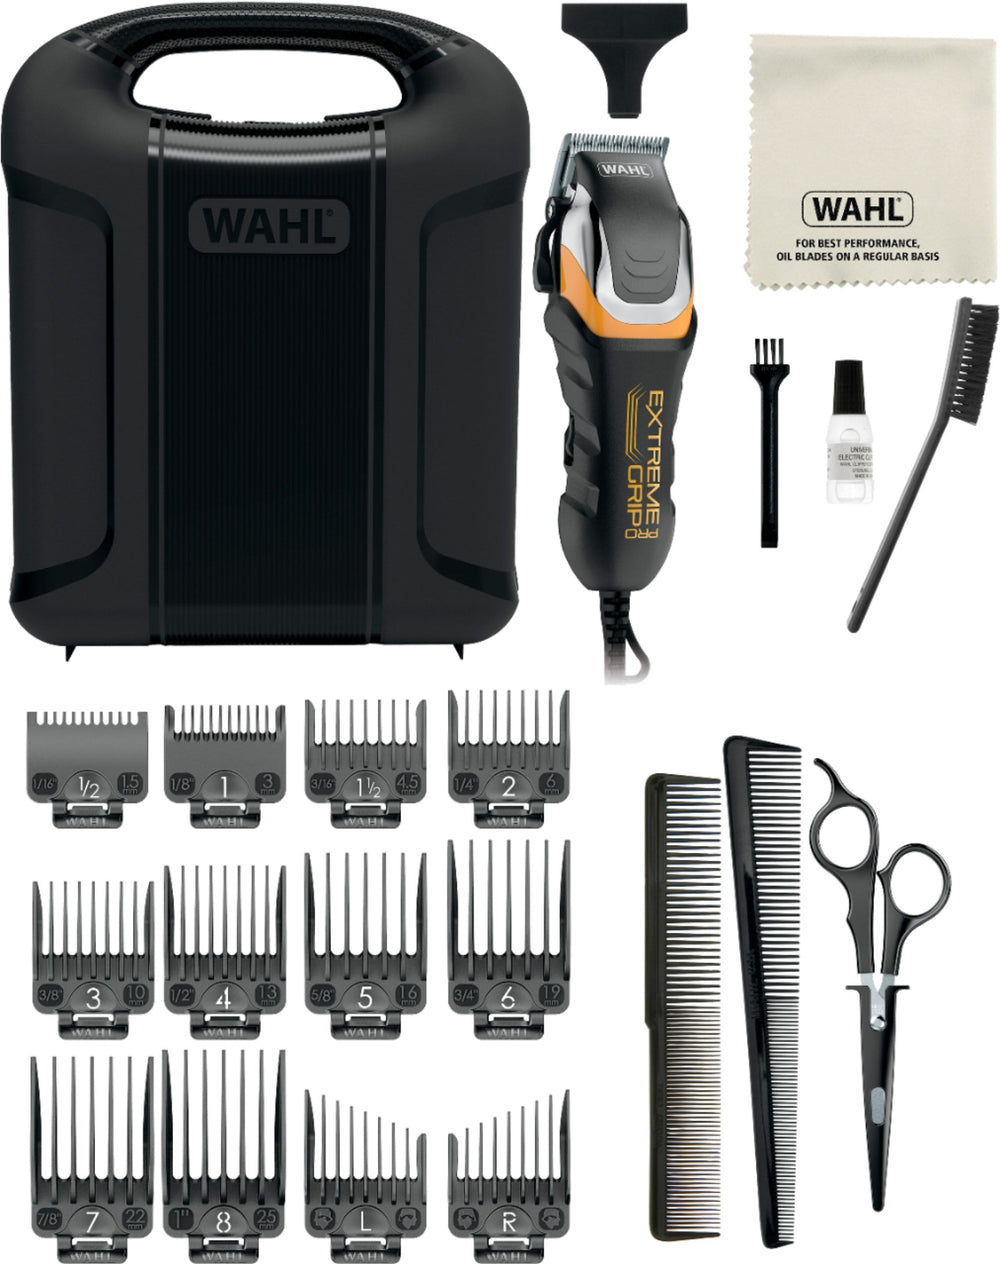 Wahl - Extreme Grip Pro Hair Clipper - Black/Silver/Yellow_1